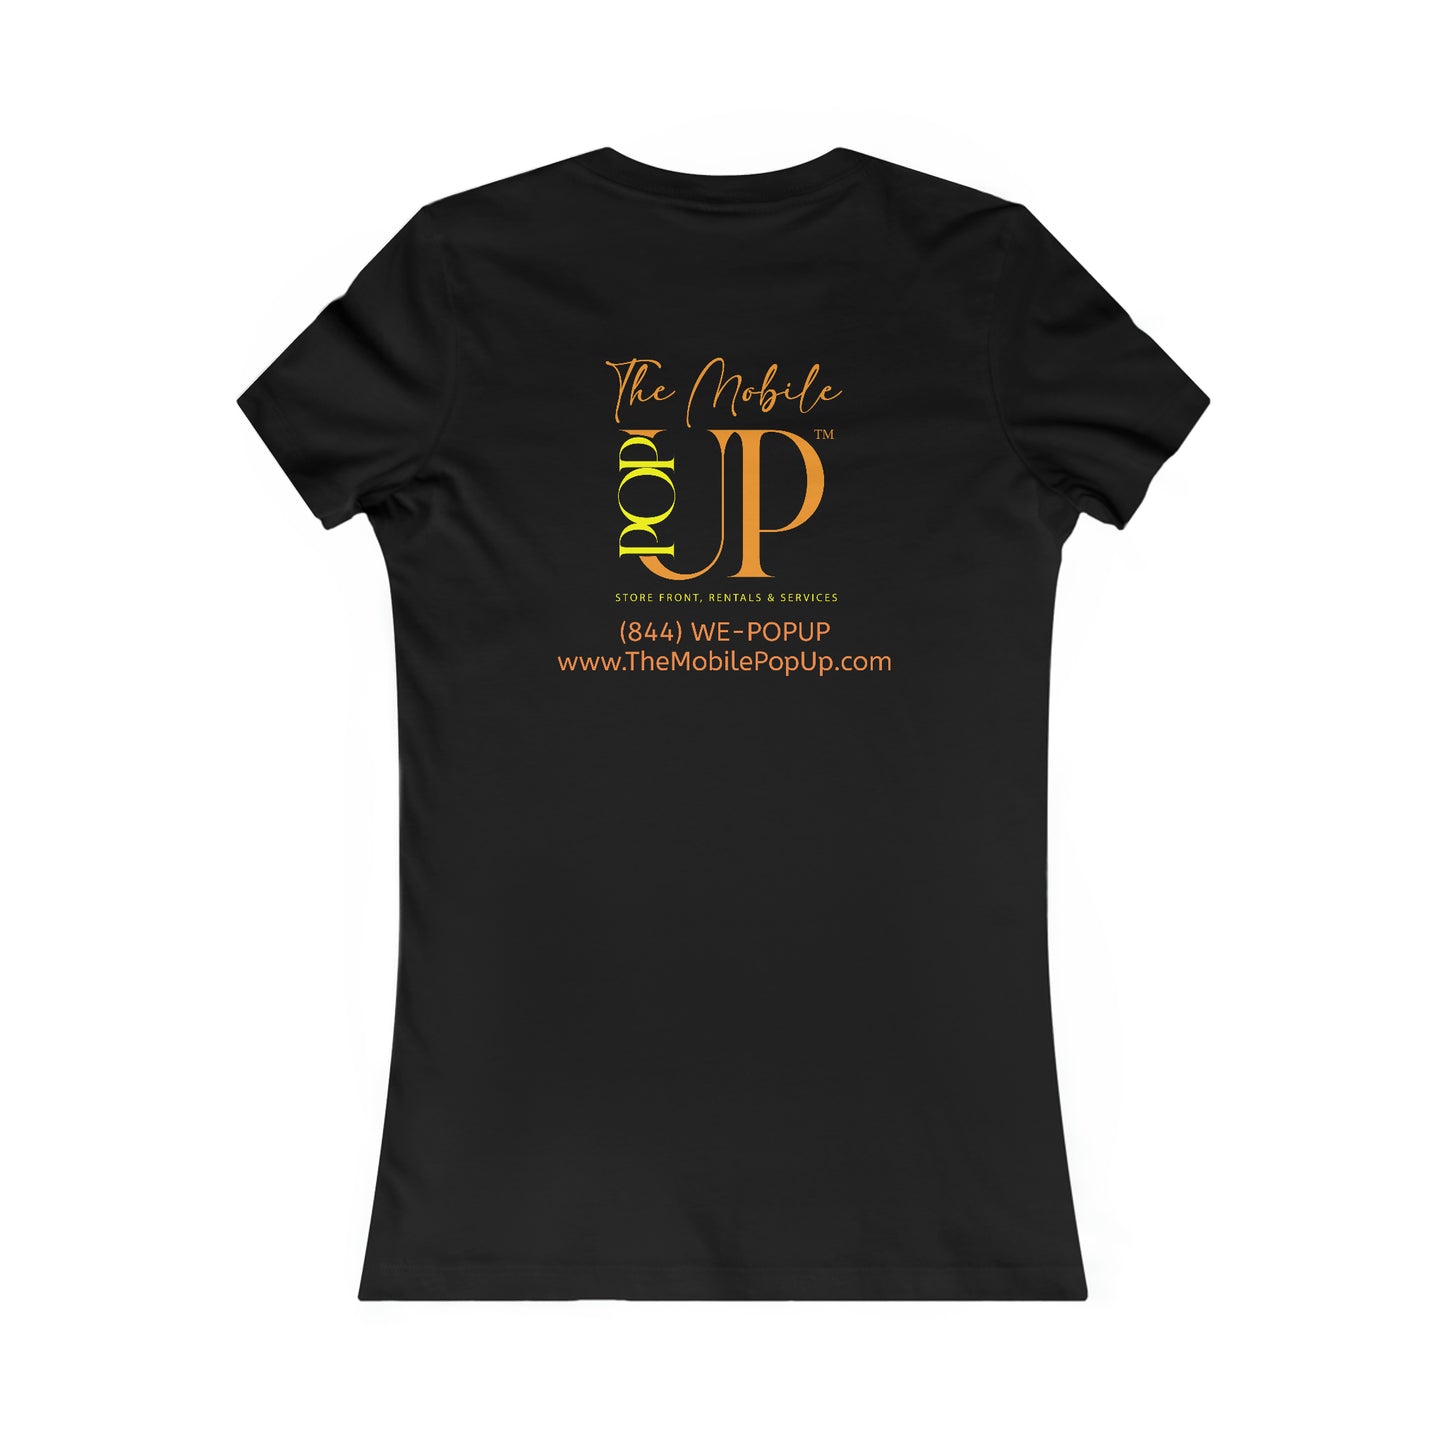 The Mobile Pop Up Women's Favorite Tee